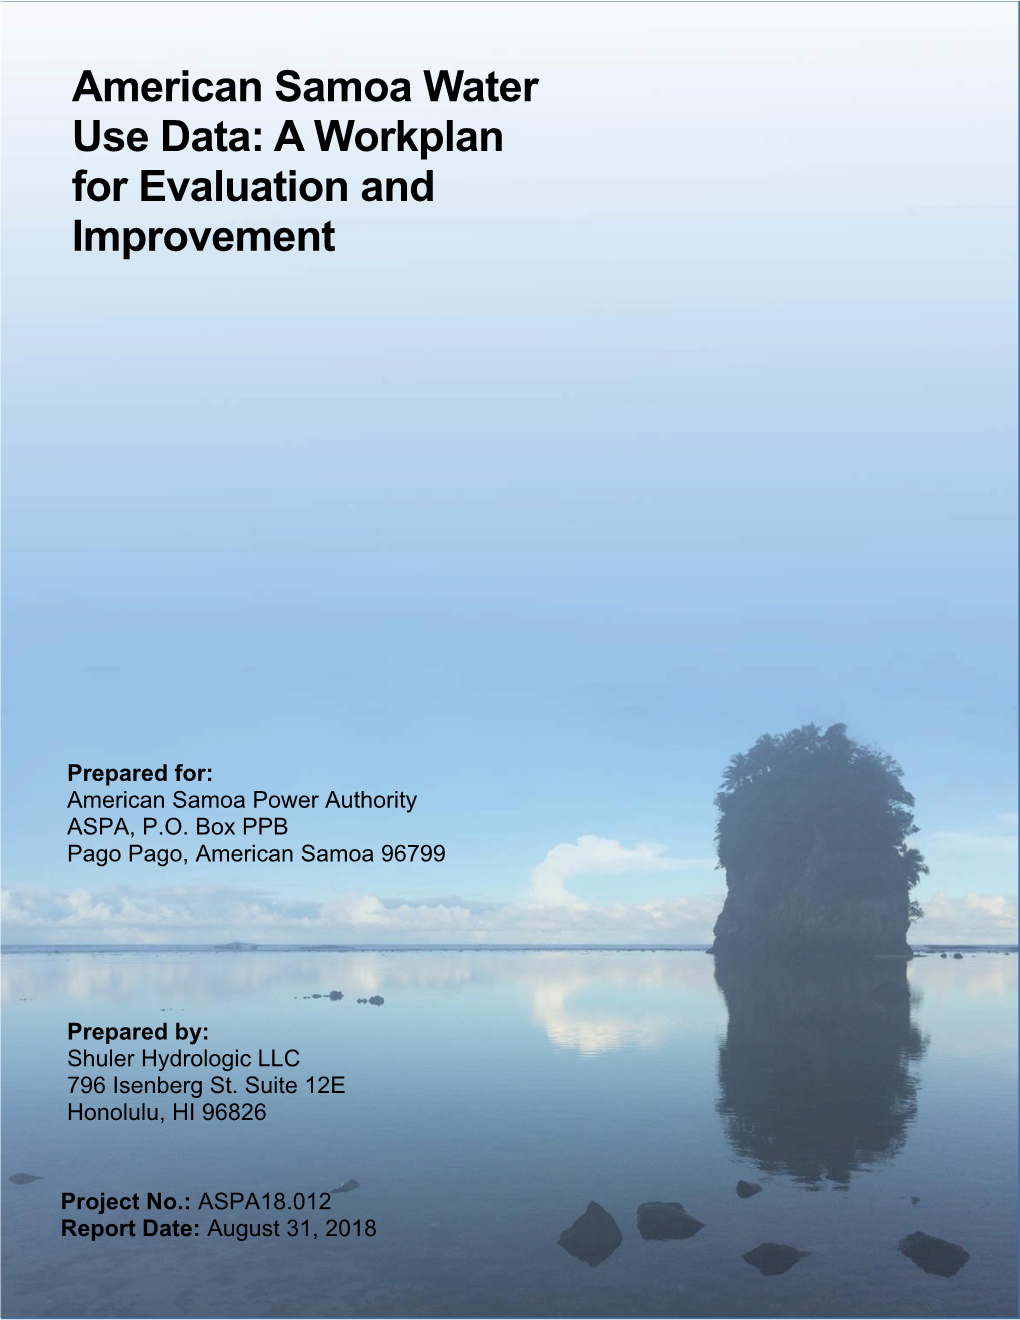 American Samoa Water Use Data: a Workplan for Evaluation and Improvement